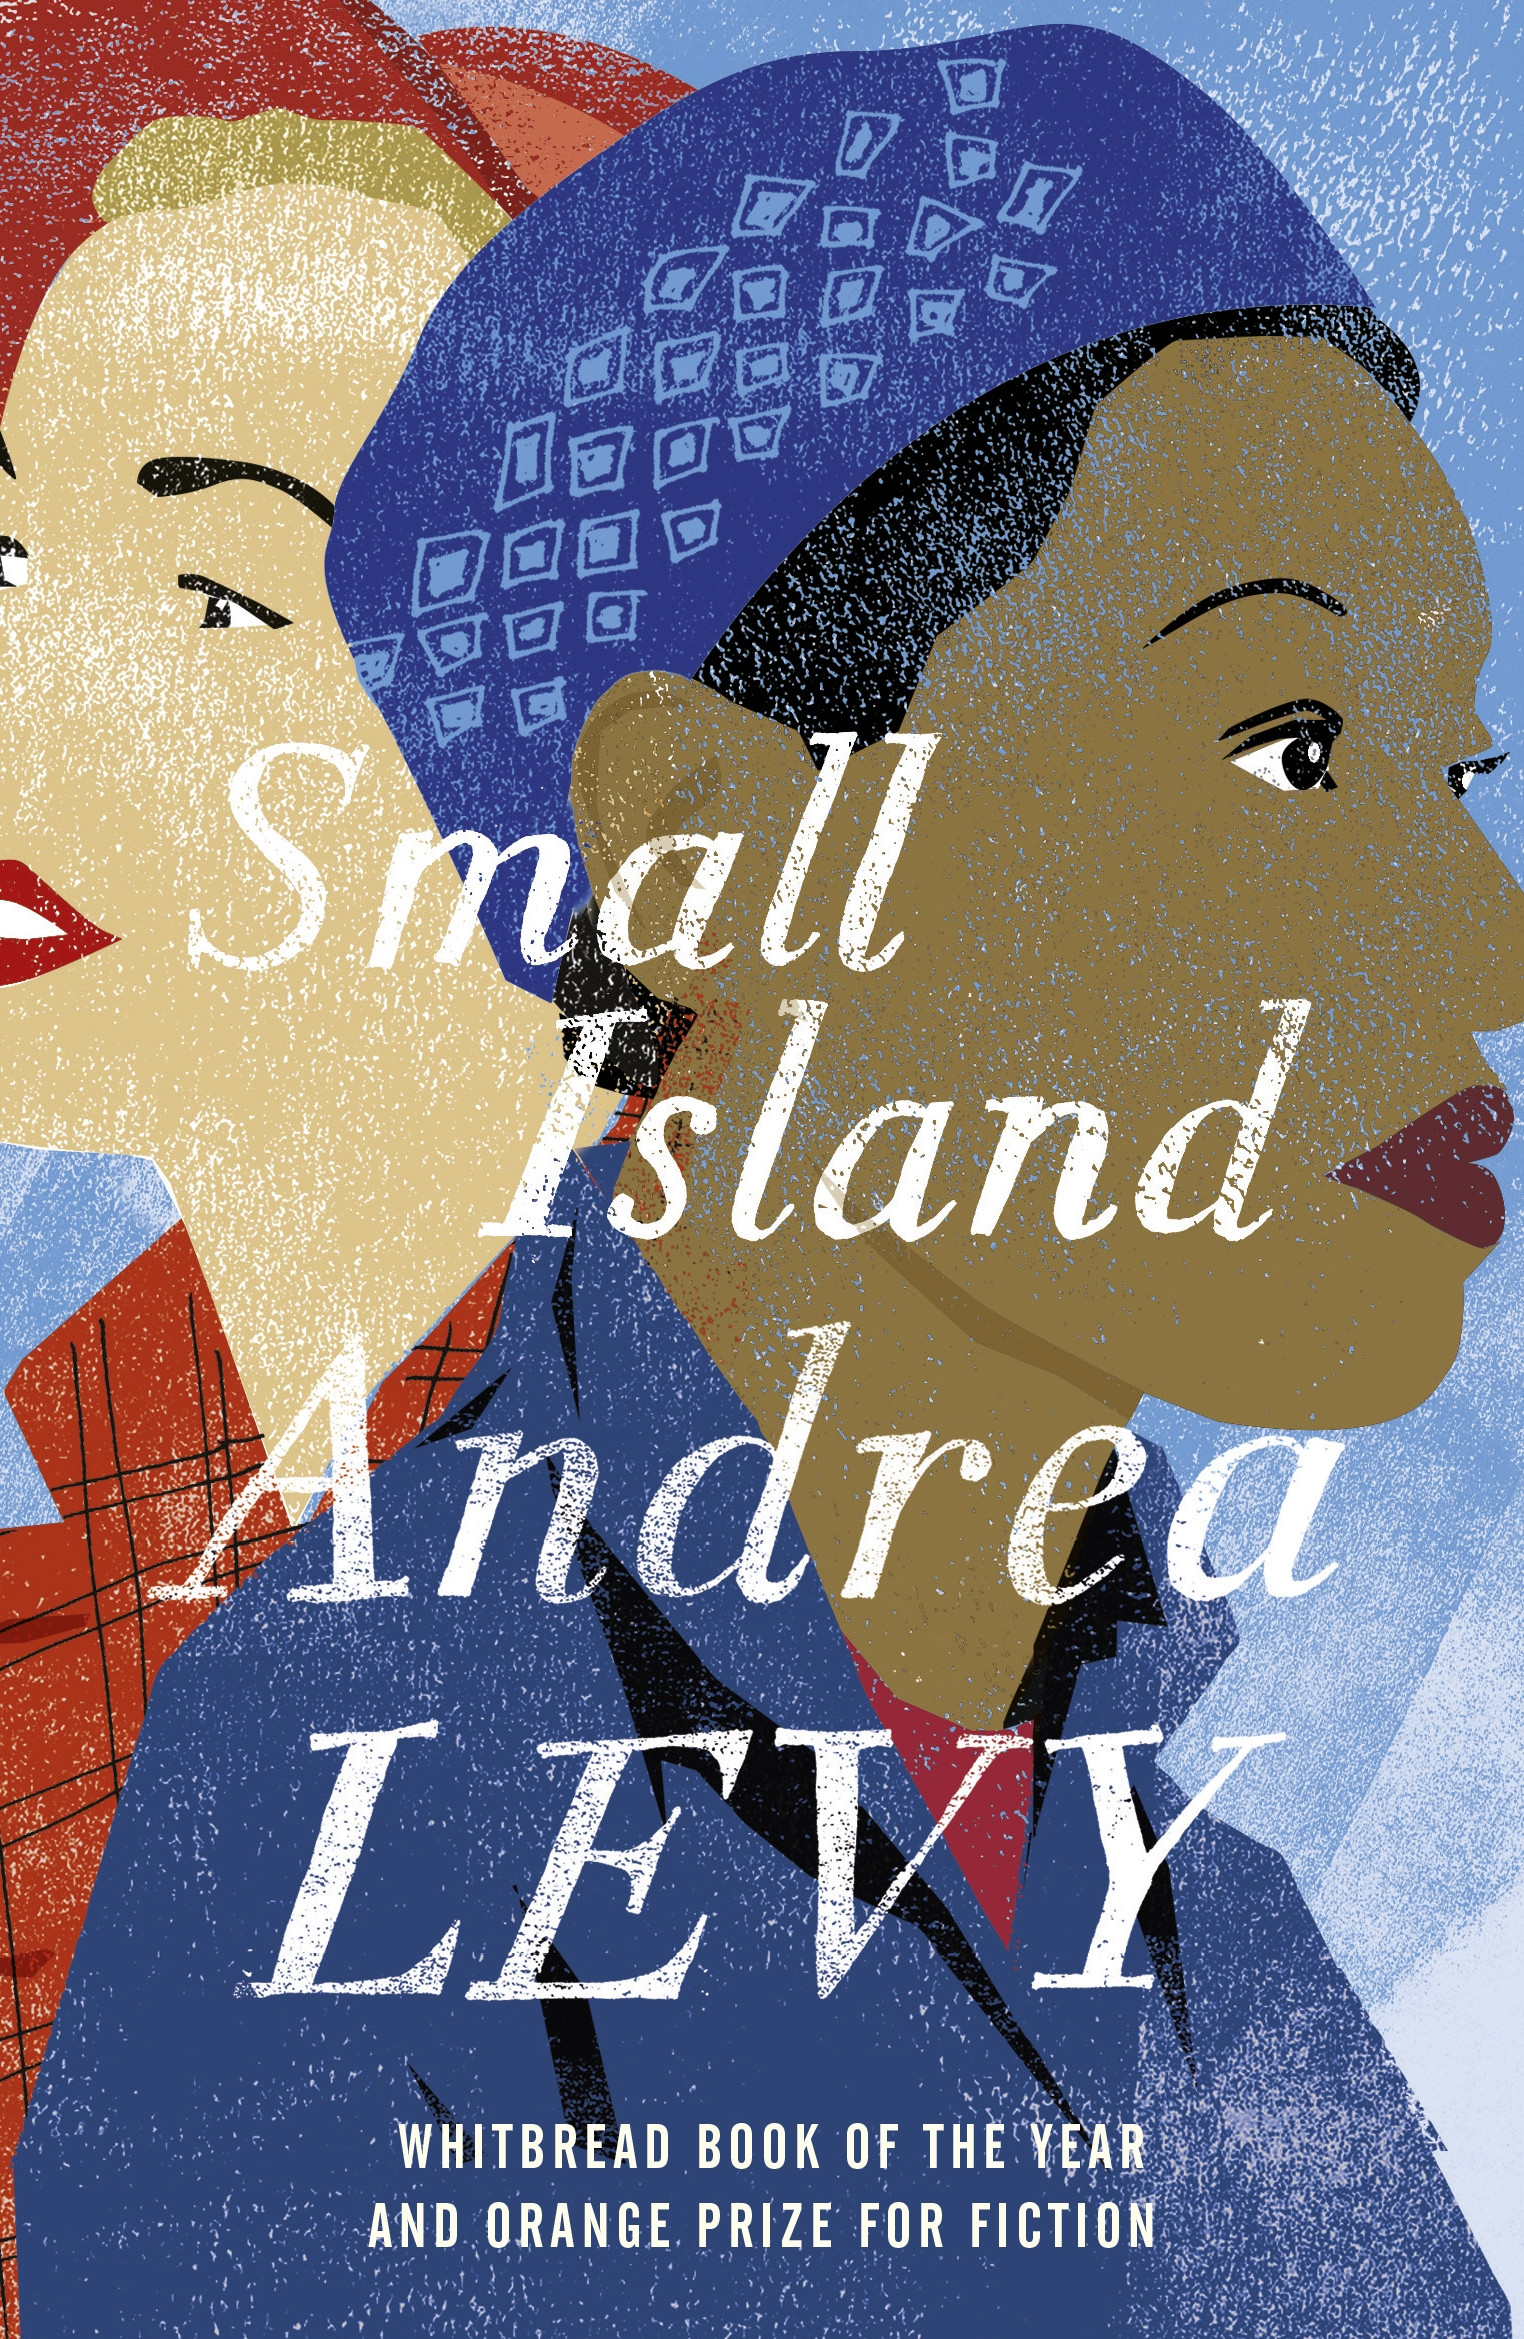 Small Island by Andrea Levy